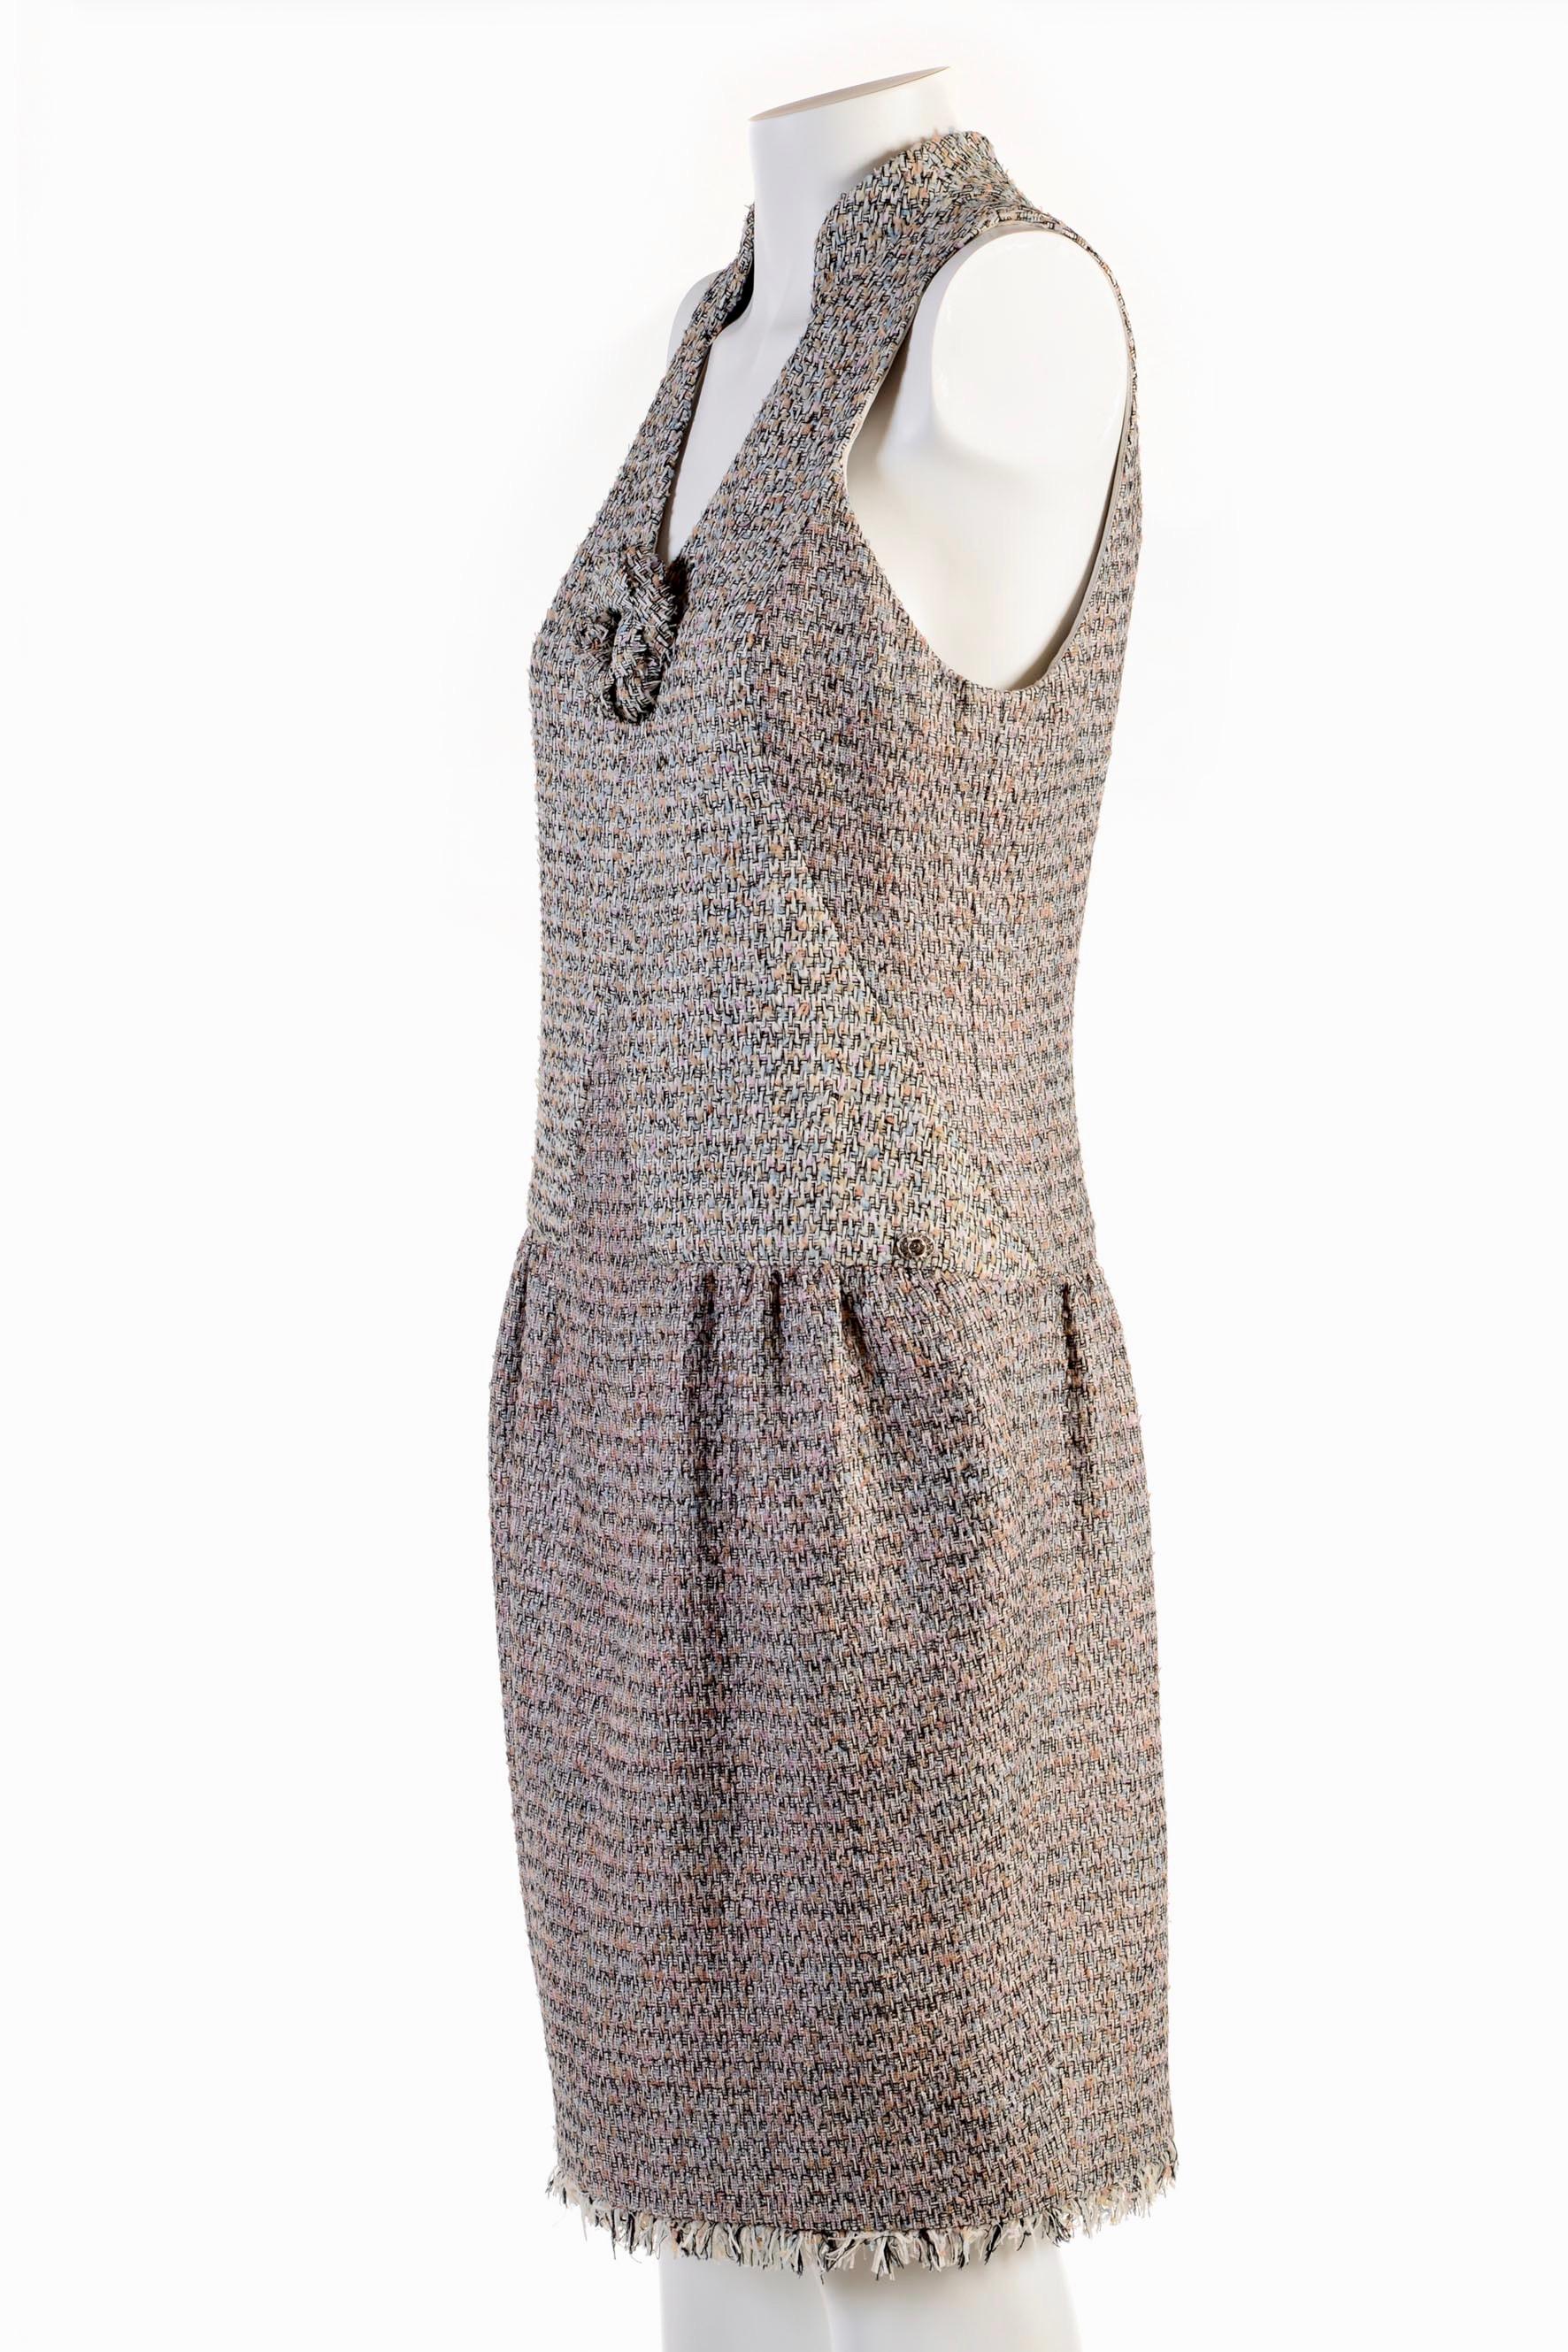 Chanel  cotton tweed dress with camelia FR 40 Spring 2011 11P In Excellent Condition For Sale In Rubiera, RE